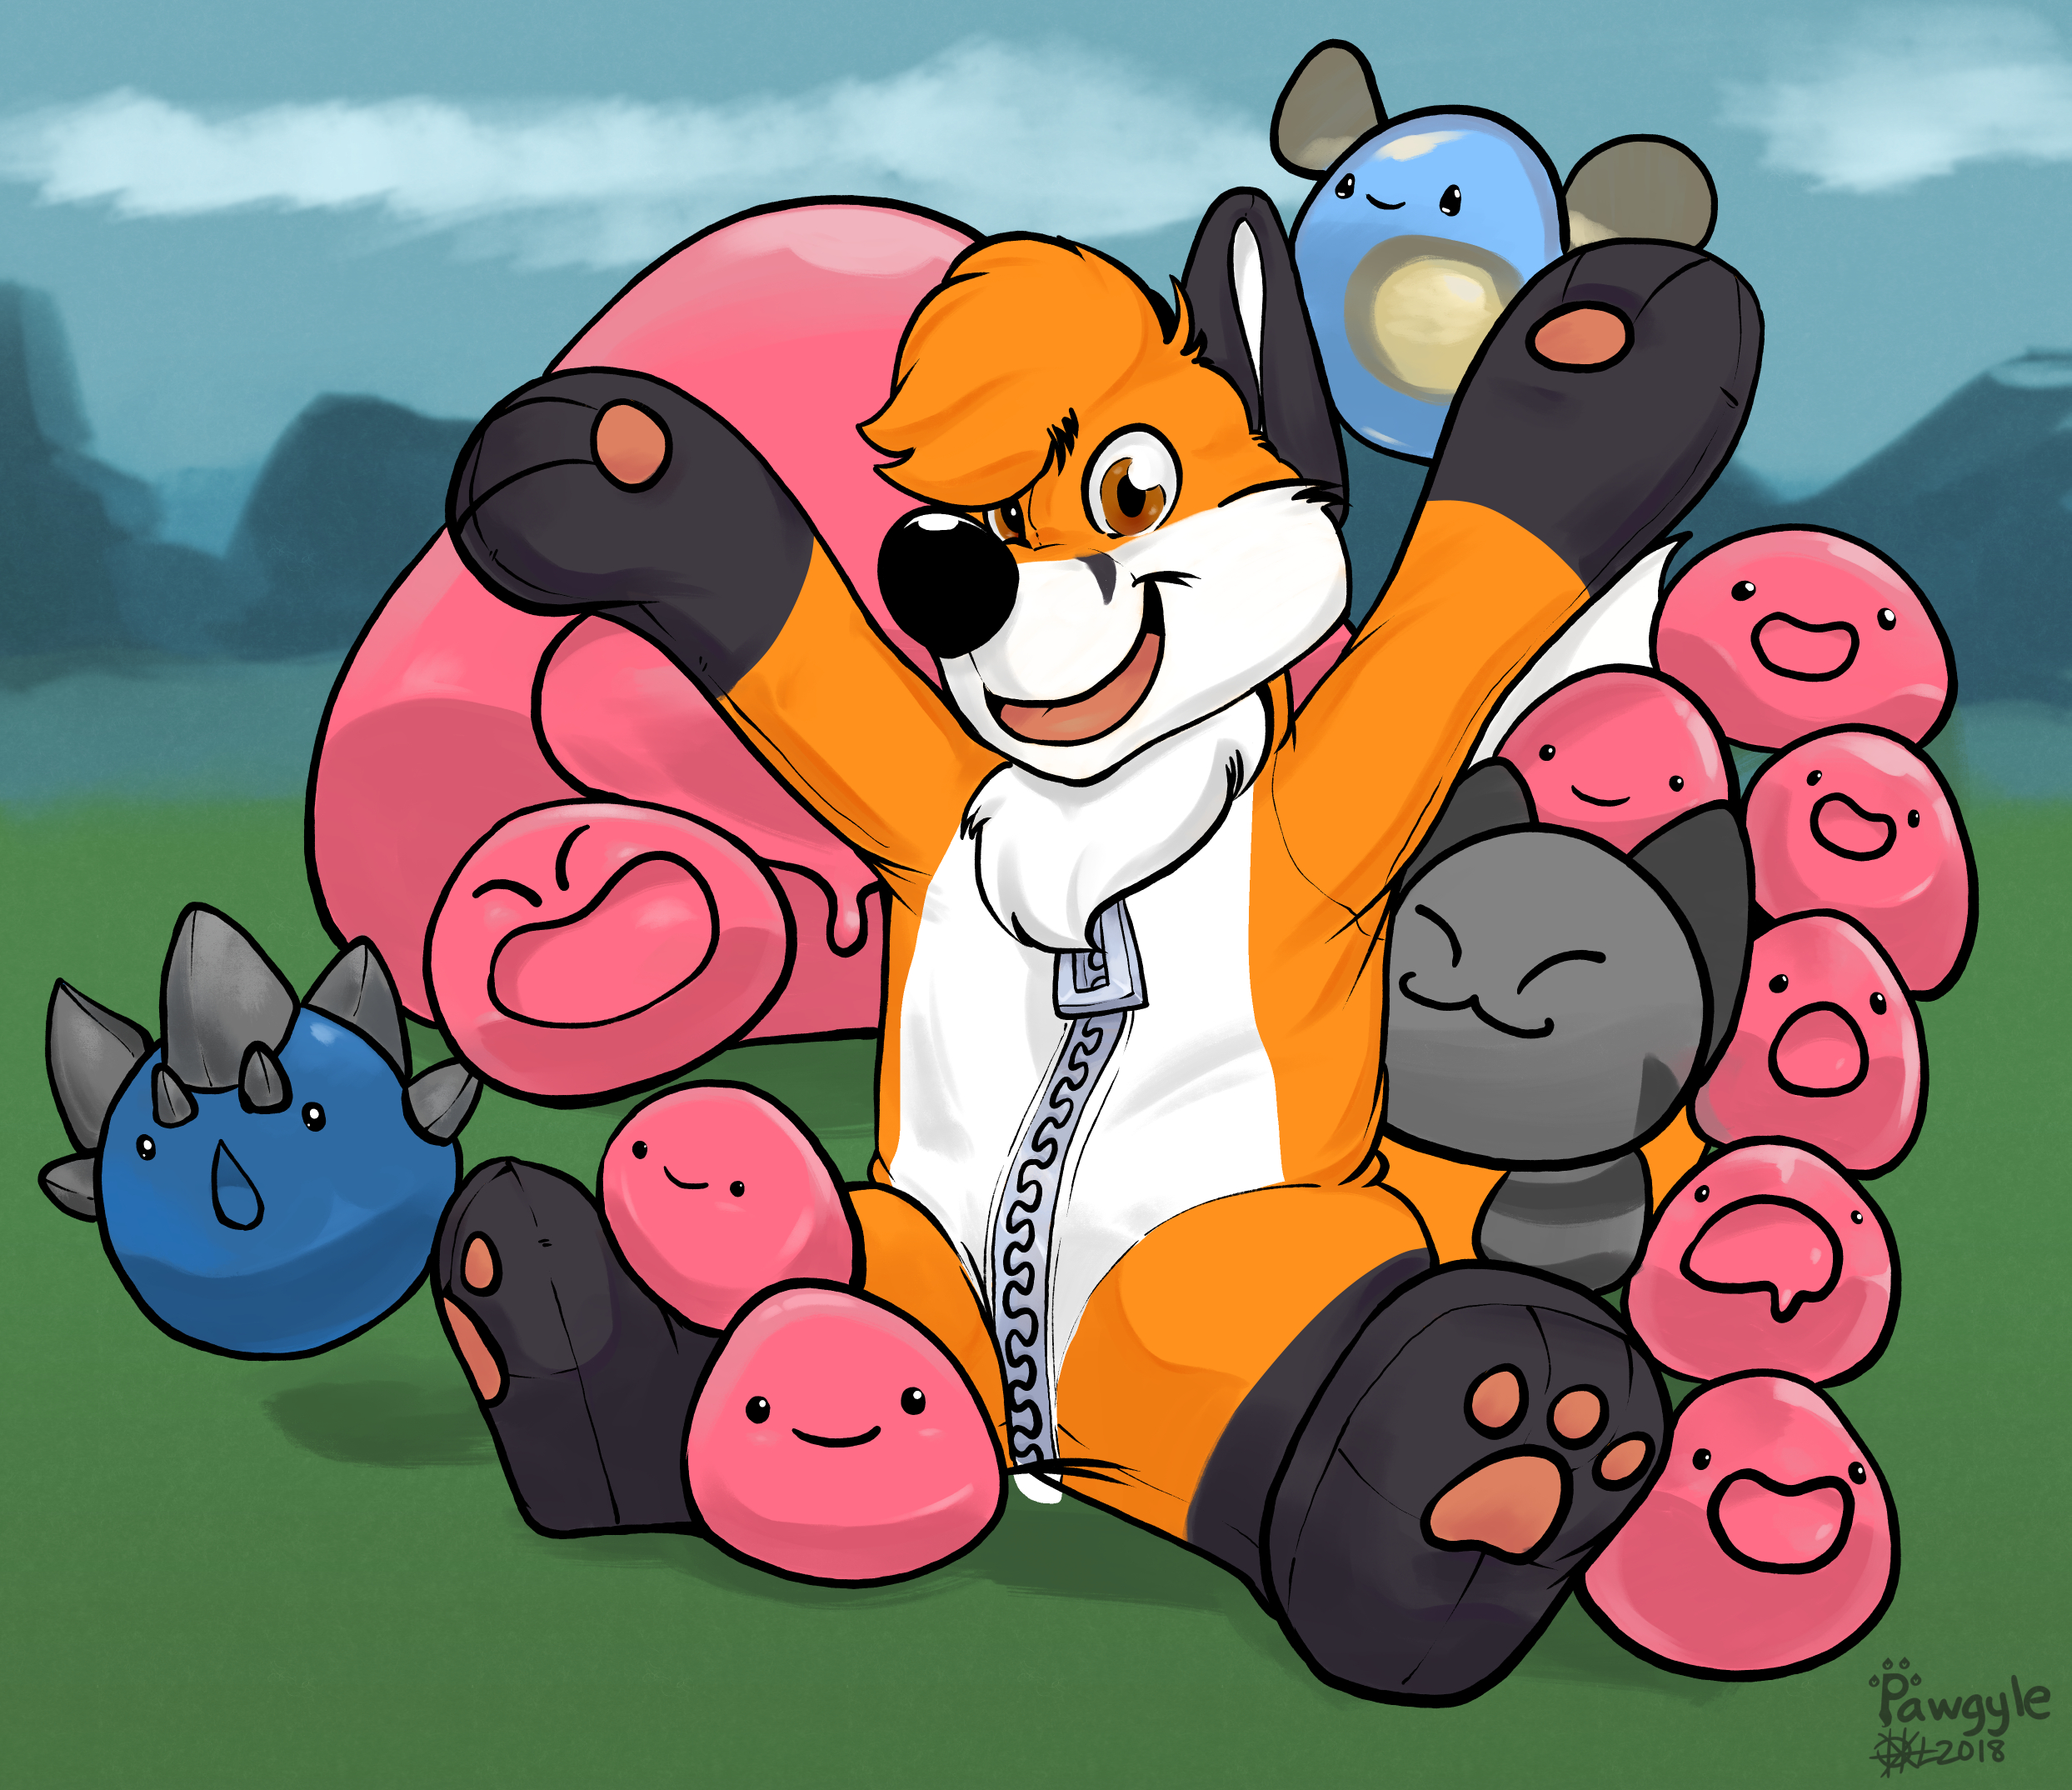 Slime rancher galore, featuring Aurapuffs. pawgyle. 